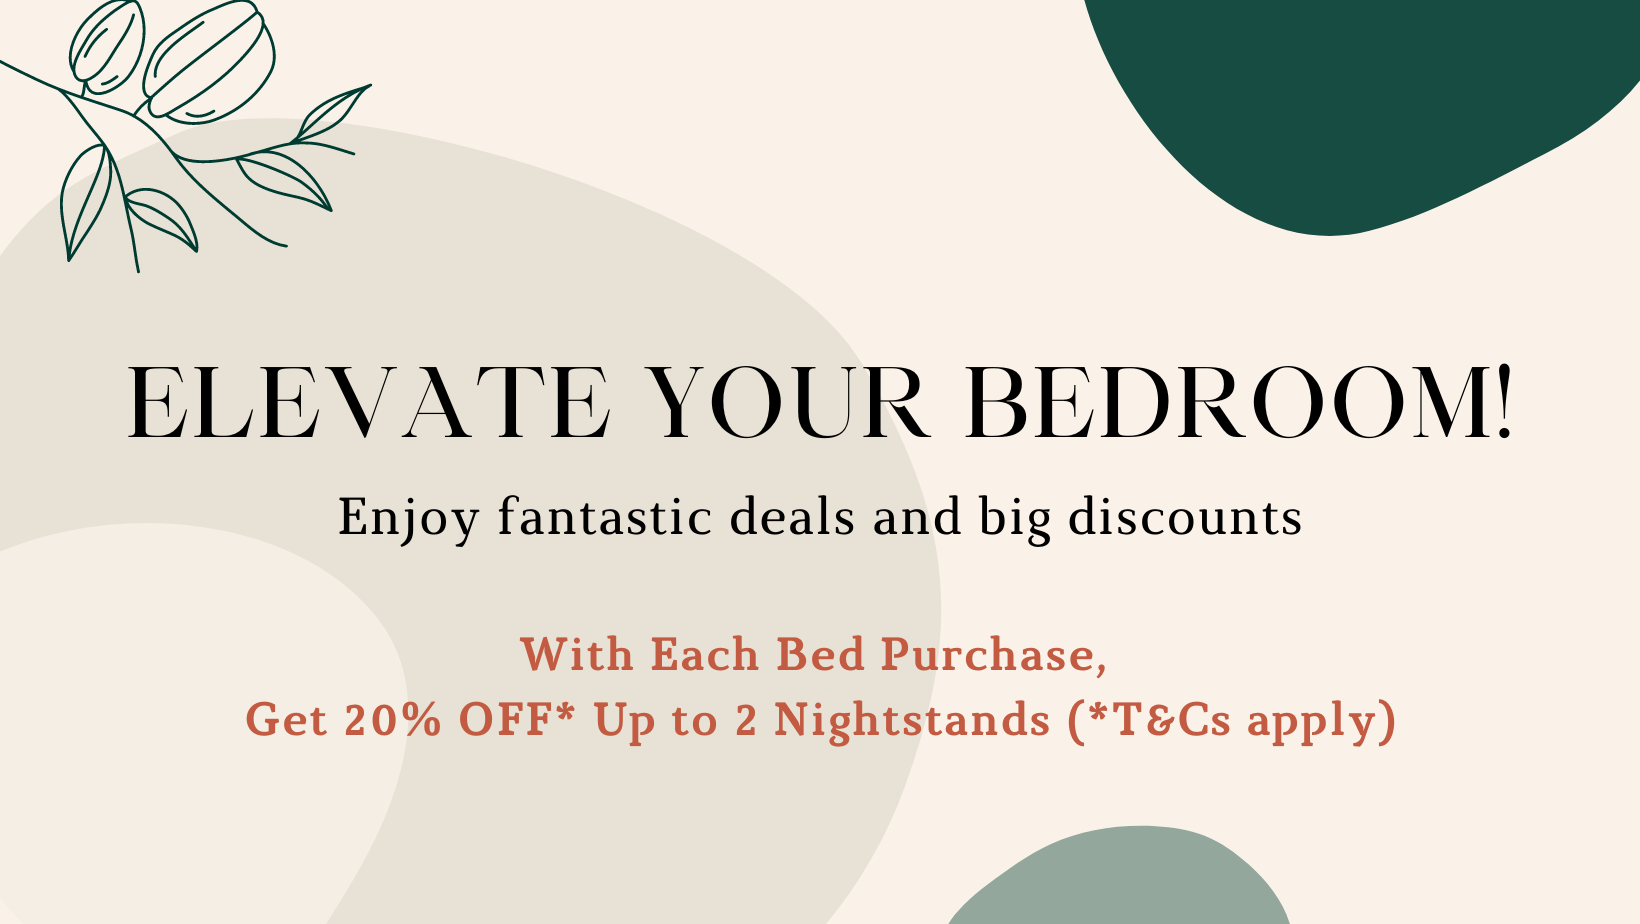 Elevate your bedroom! Enjoy fantastic deals and big discounts. With Each Bed Purchase,  Get 20% OFF* Up to 2 Nightstands (*T&Cs apply)